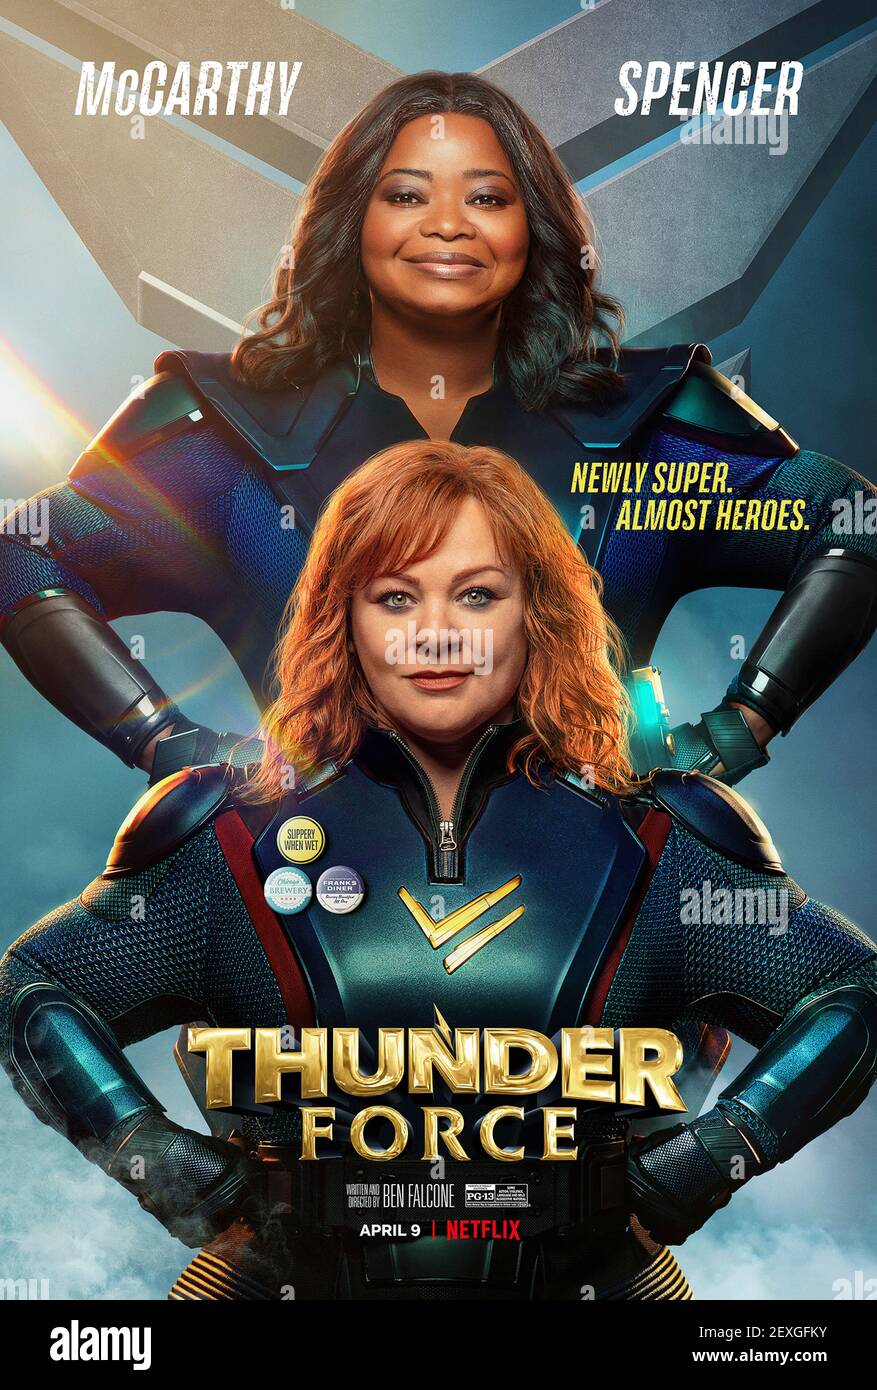 Thunder Force (2021) directed by Ben Falcone and starring Pom Klementieff, Jason Bateman and Melissa McCarthy. TV series about two friends who form a superhero team after one devises a treatment that gives them powers to protect their city. Stock Photo